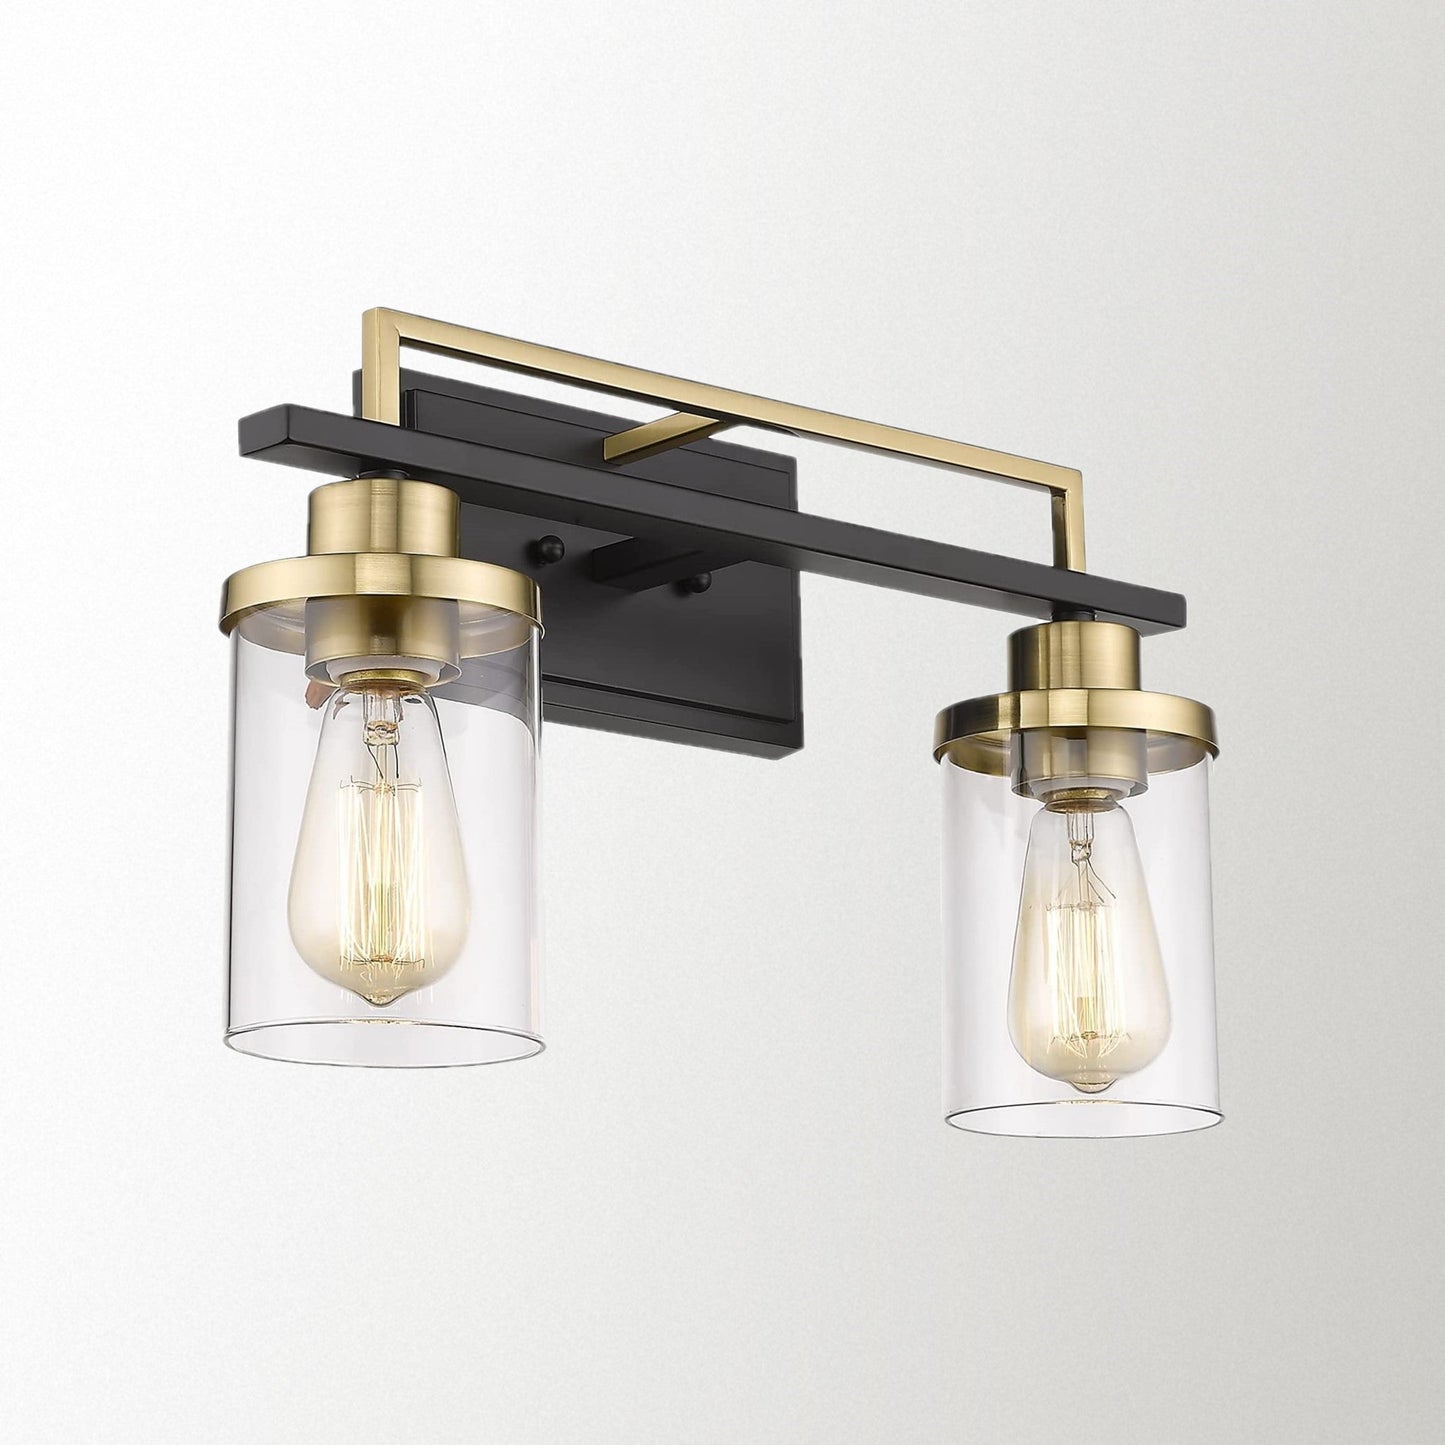 
                  
                    Emliviar 2-Light Gold Bathroom Light Fixtures - Vanity Light in Black and Gold Finish with Clear Glass,YCE238B-2W BK+BG
                  
                